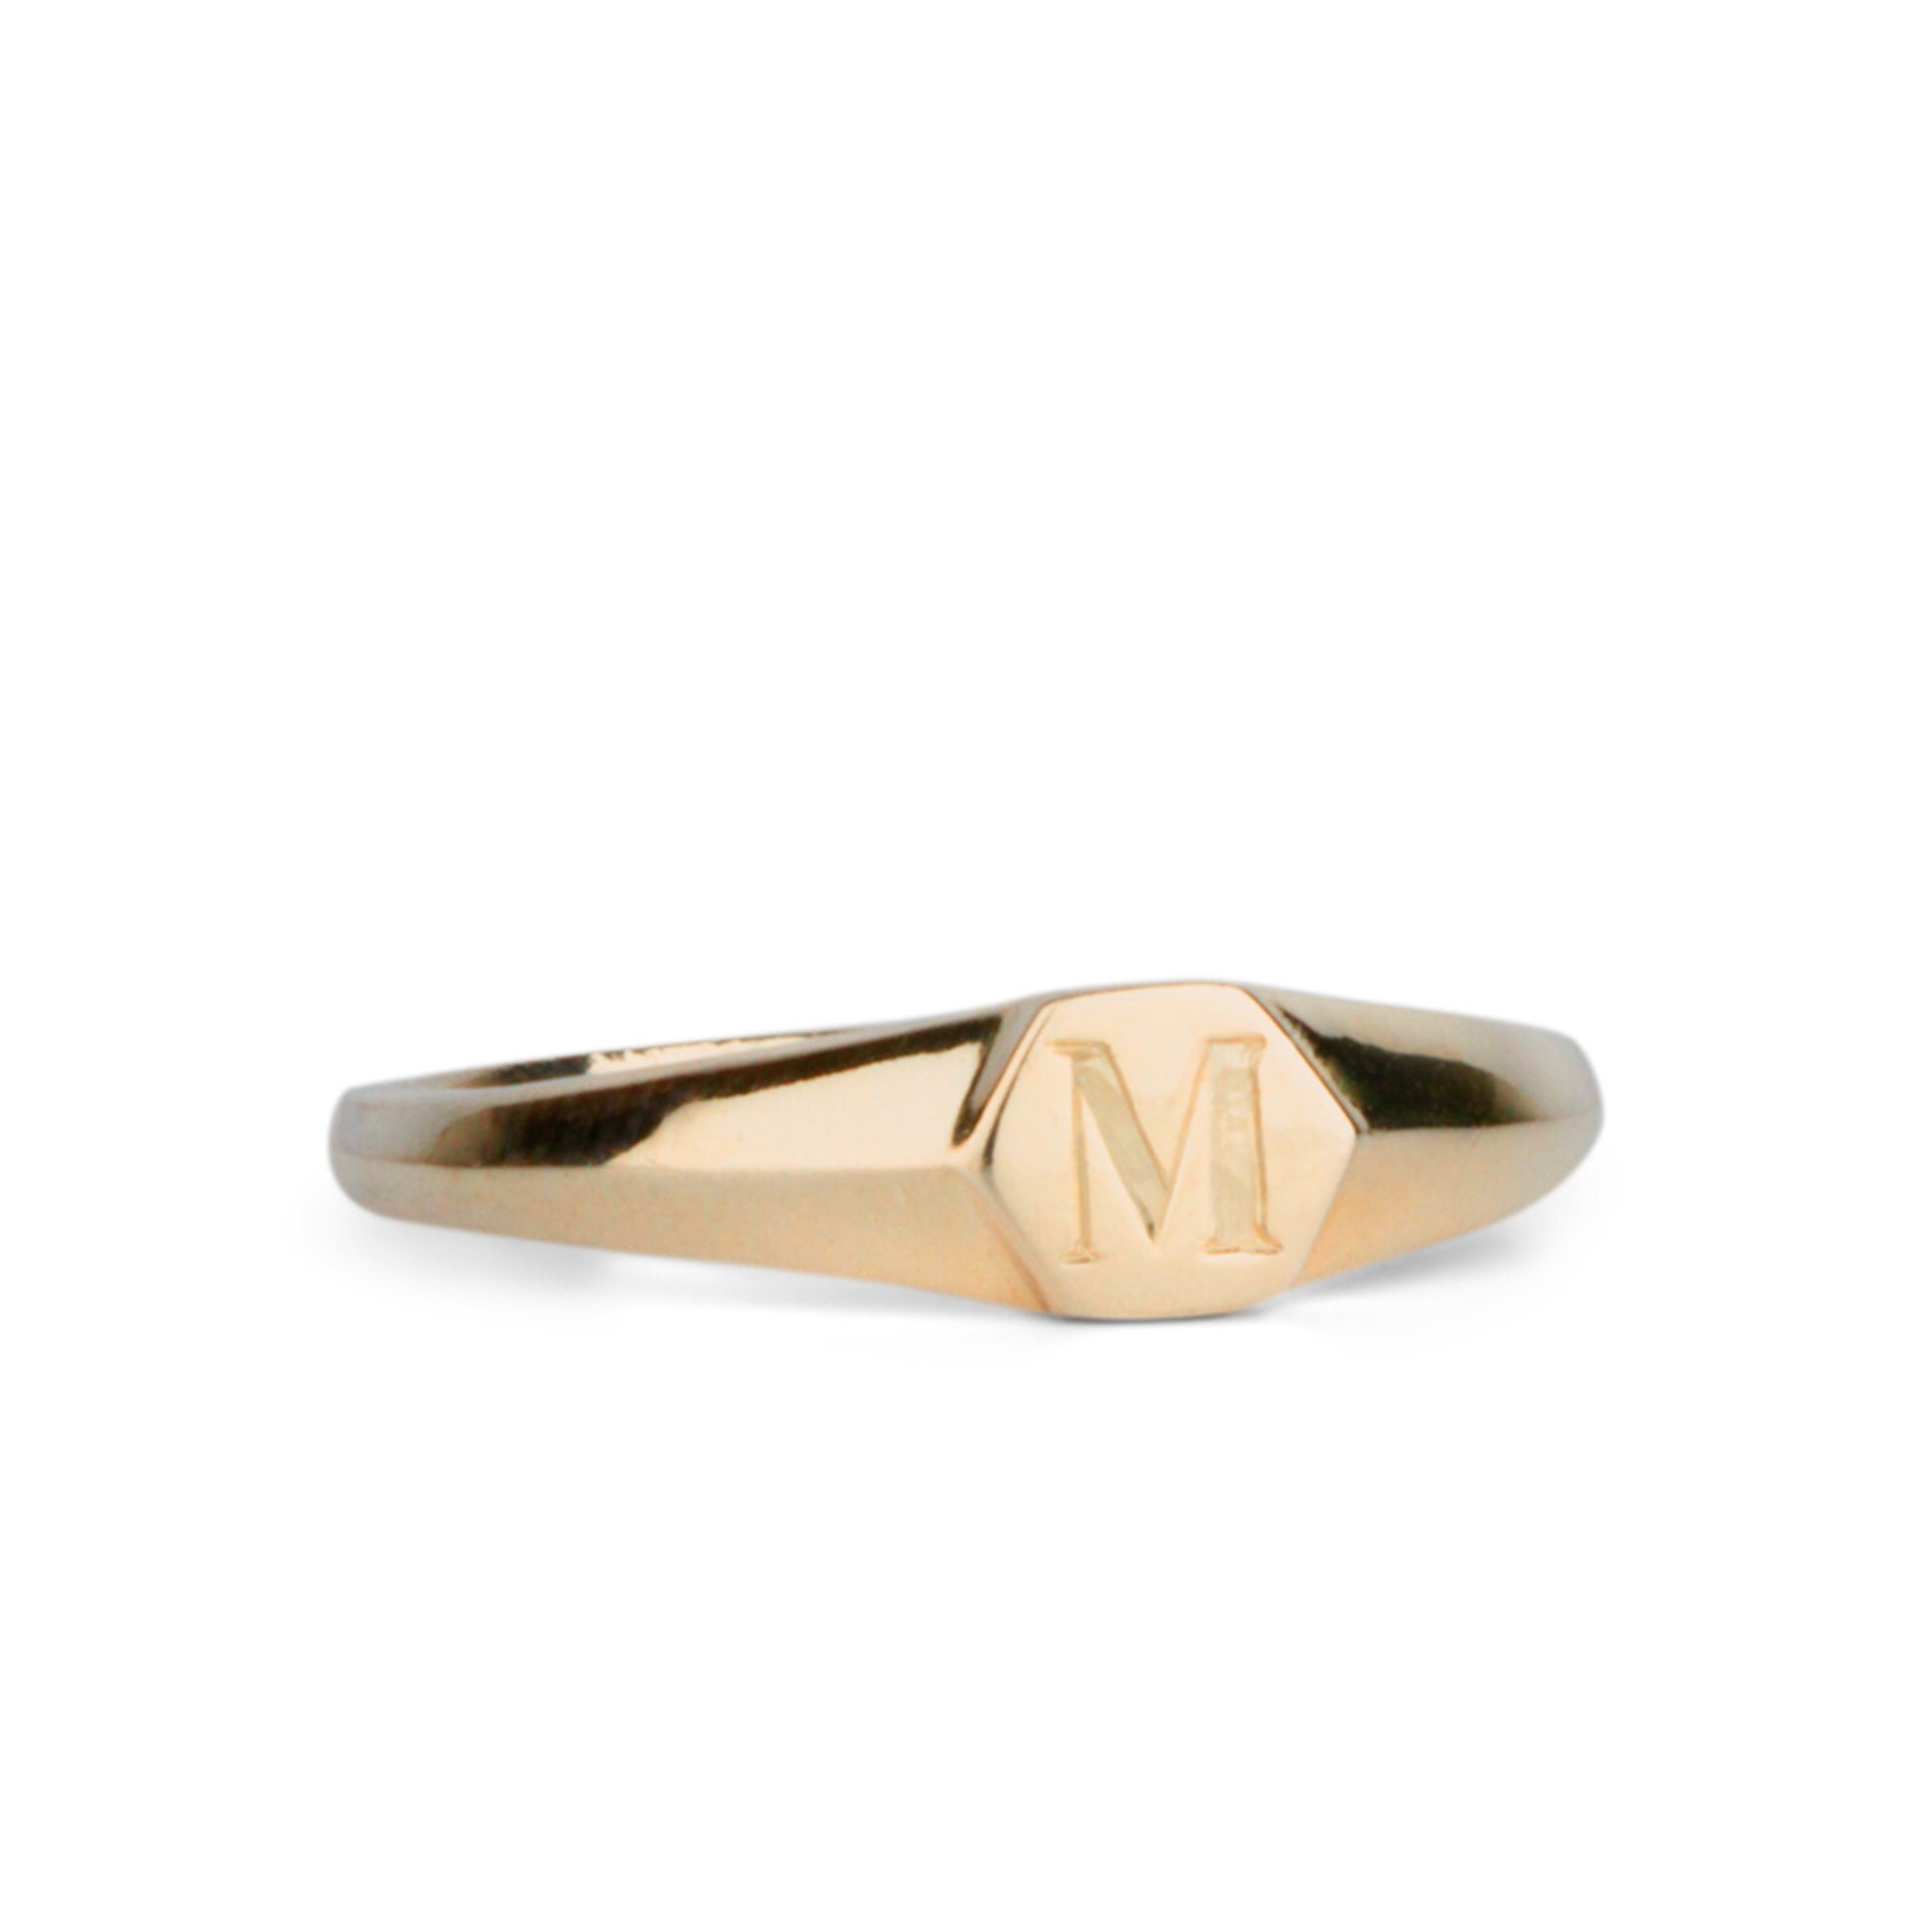 Astra Gold Signet Ring with Engraved Block Letter